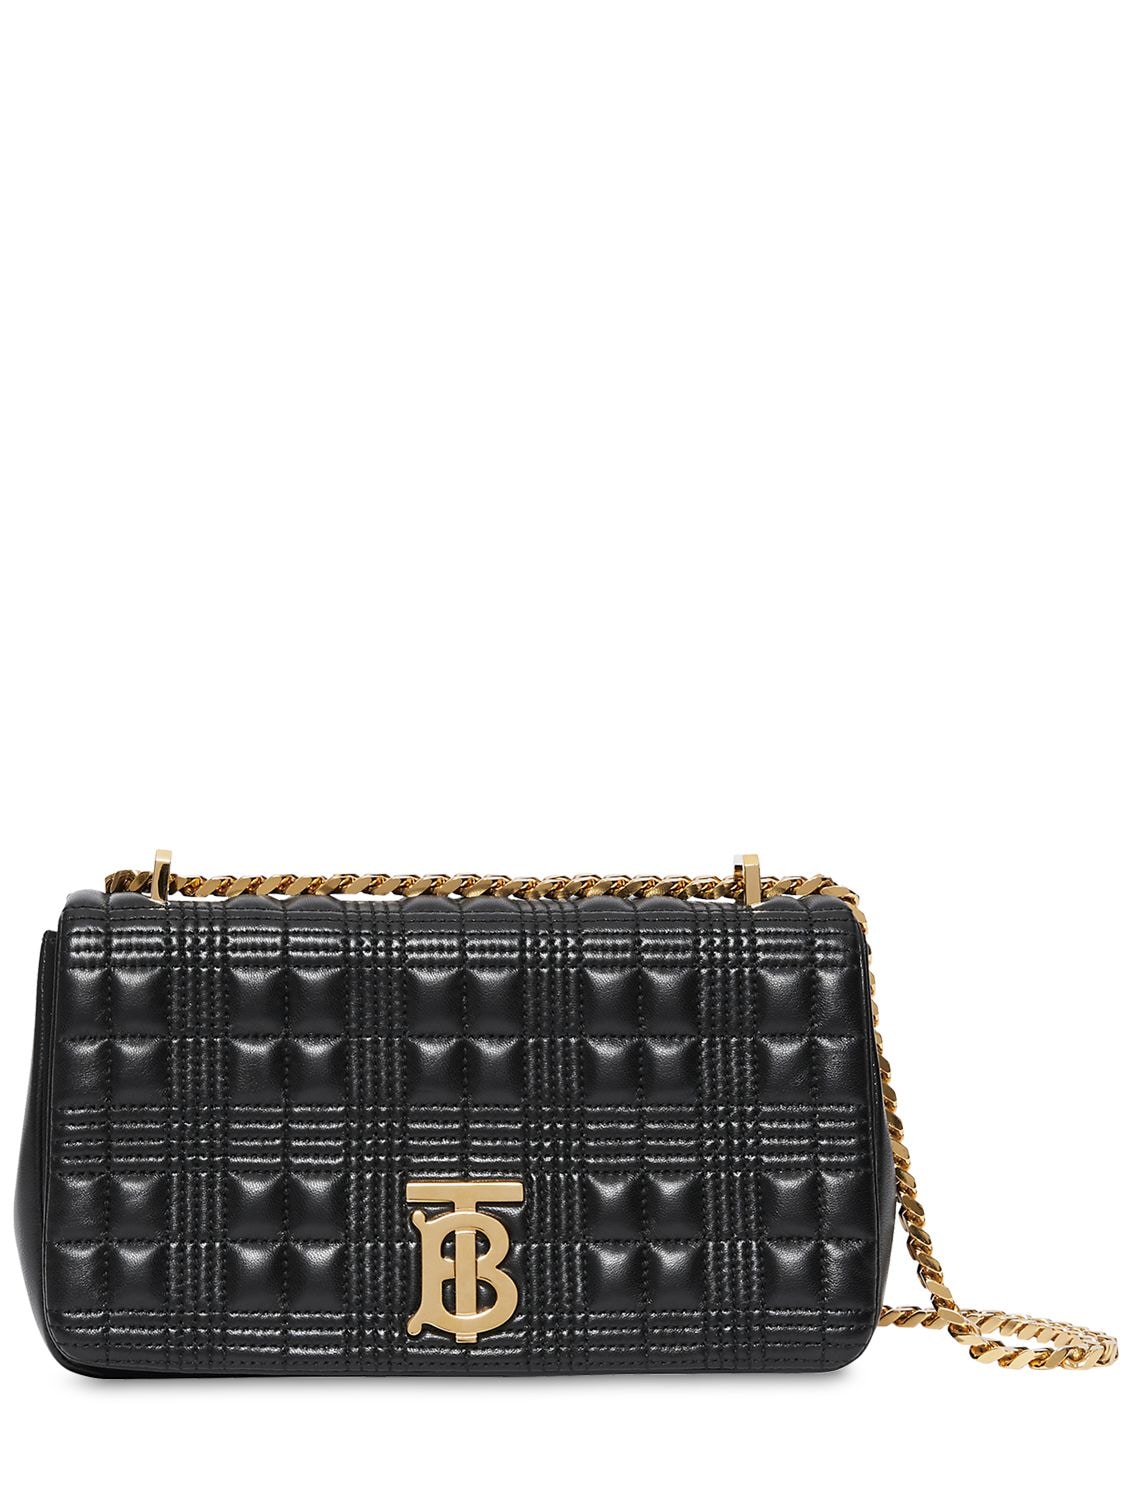 BURBERRY Small Lola Quilted Leather Bag